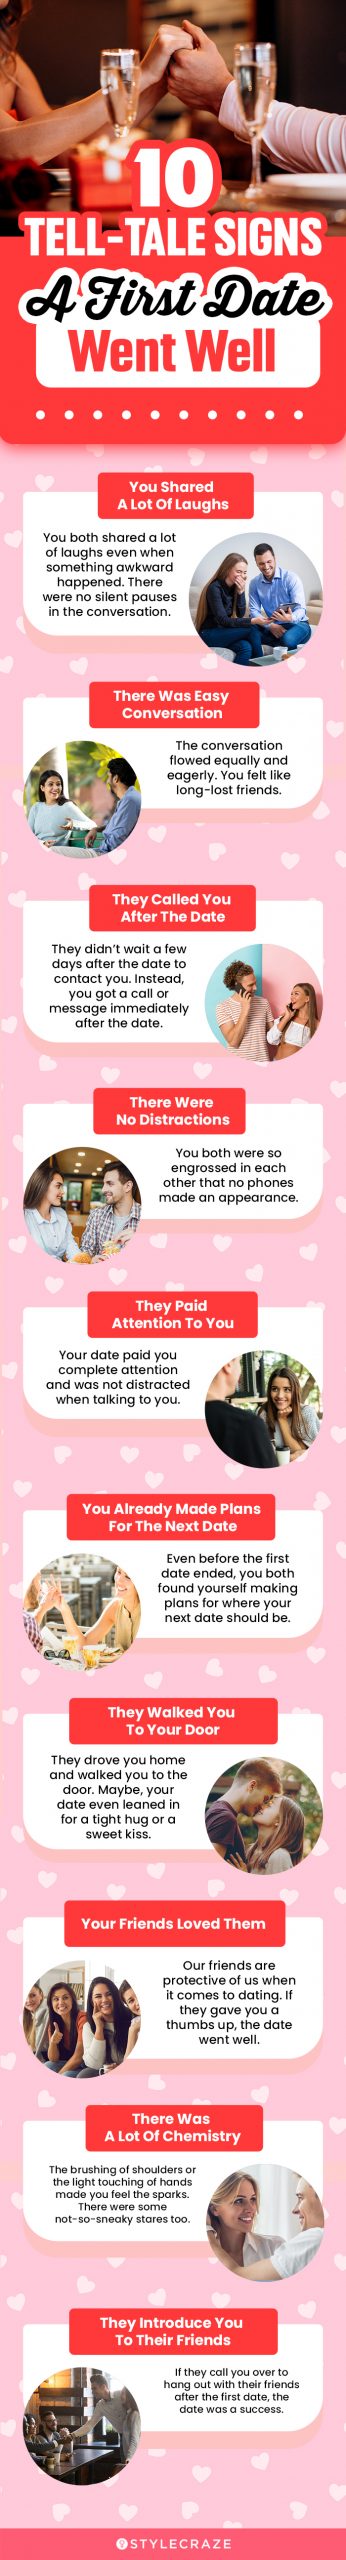 10 tale tell signs a date went well (infographic)